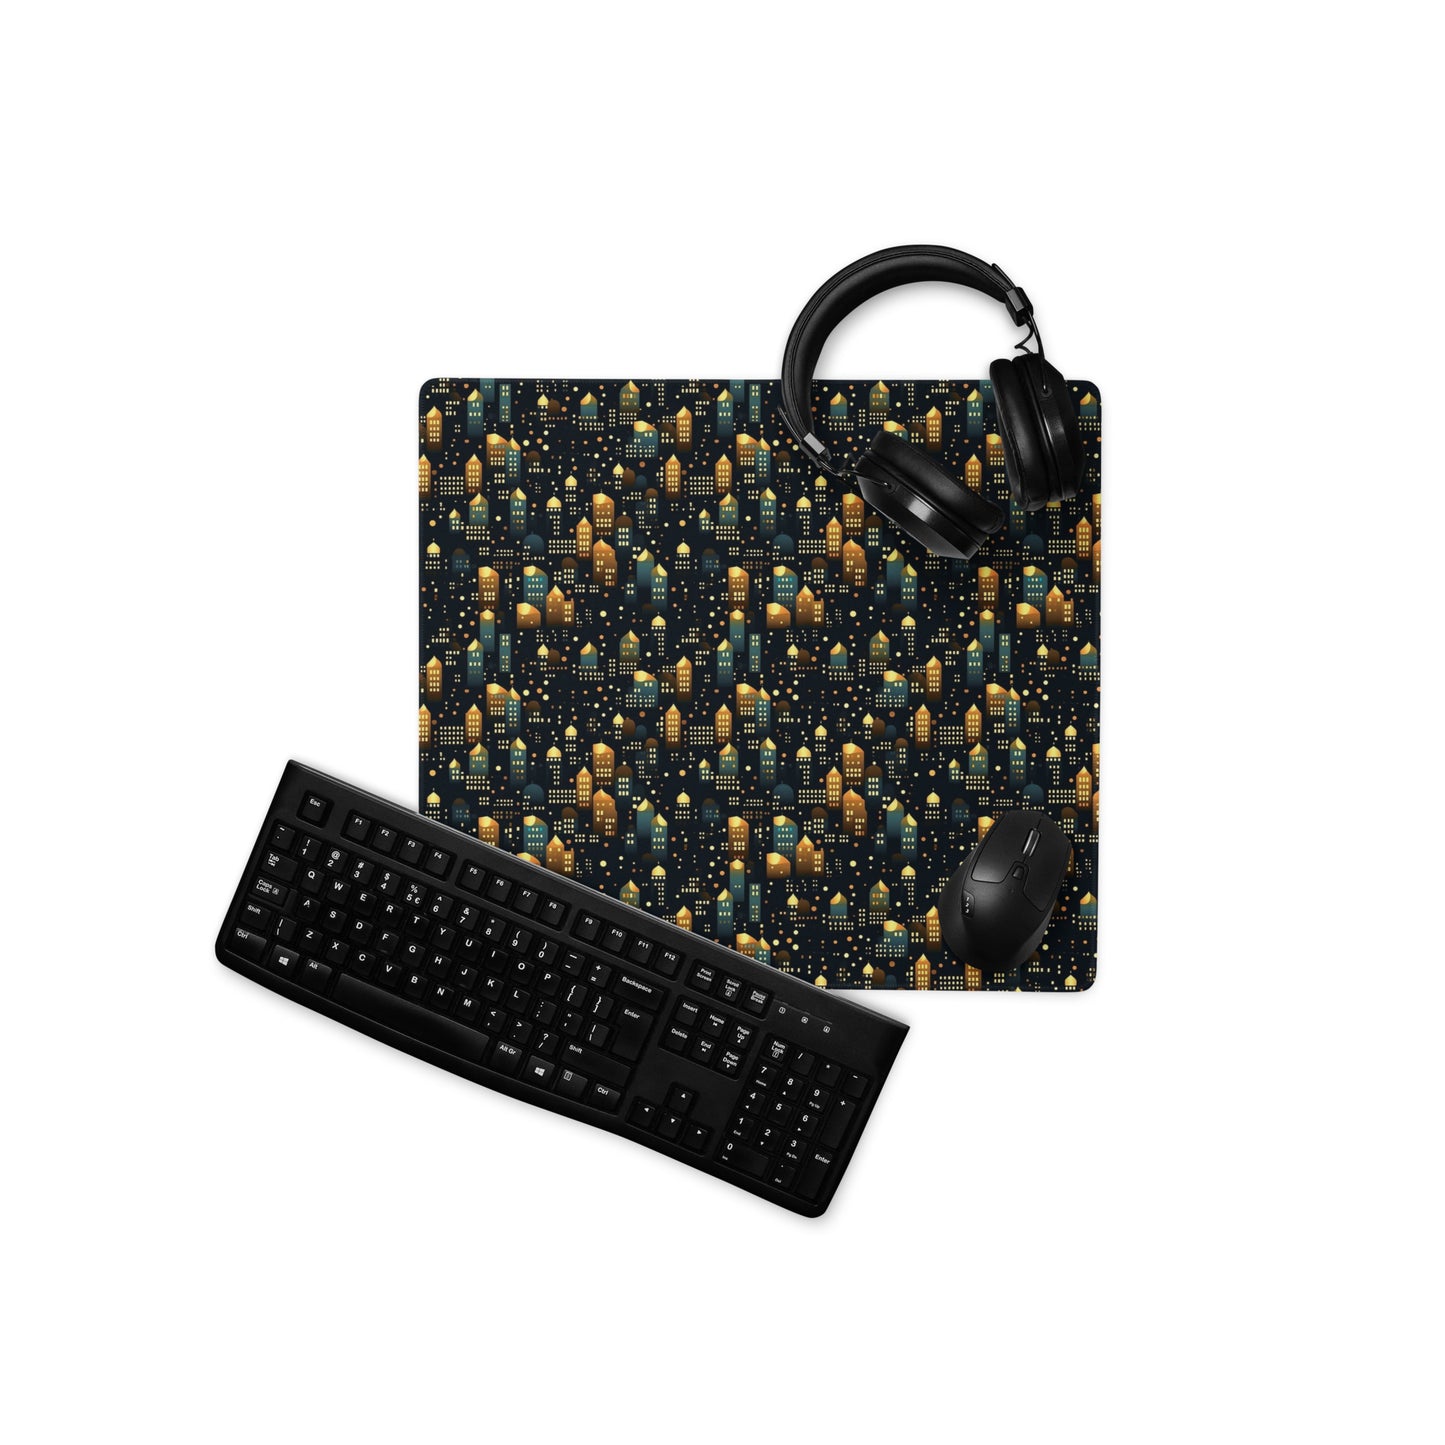 A 18" x 16" desk pad with a stary city pattern. With a keyboard, mouse, and headphones sitting on it.